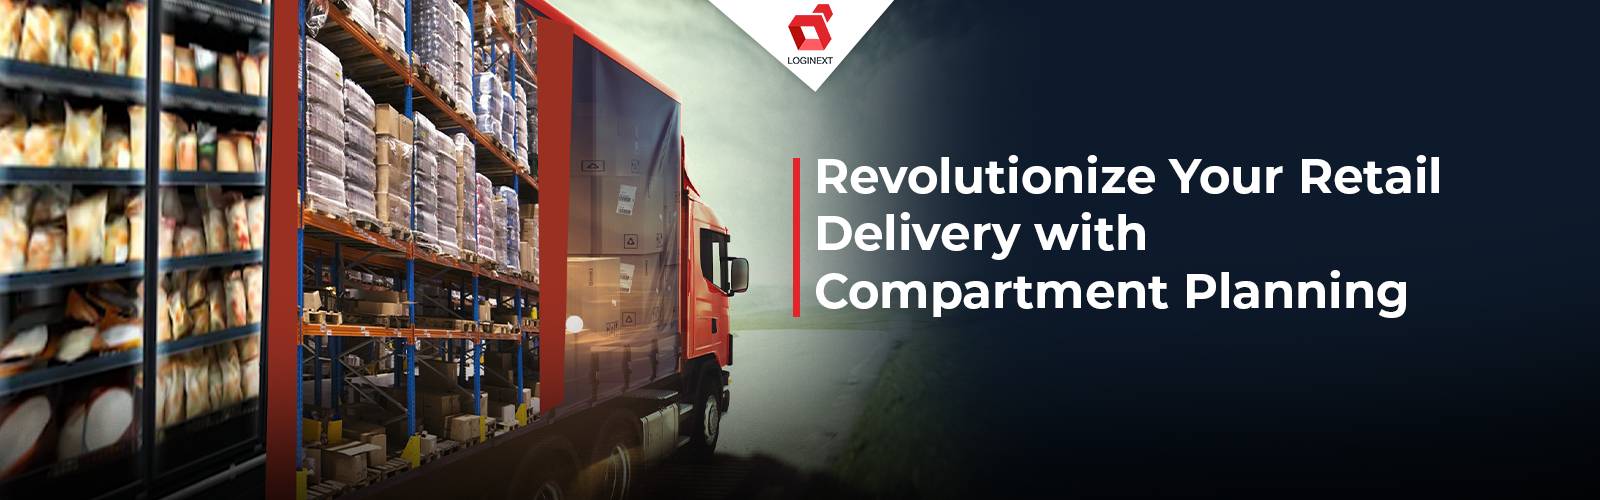 How compartment planning revolutionizing retail delivery